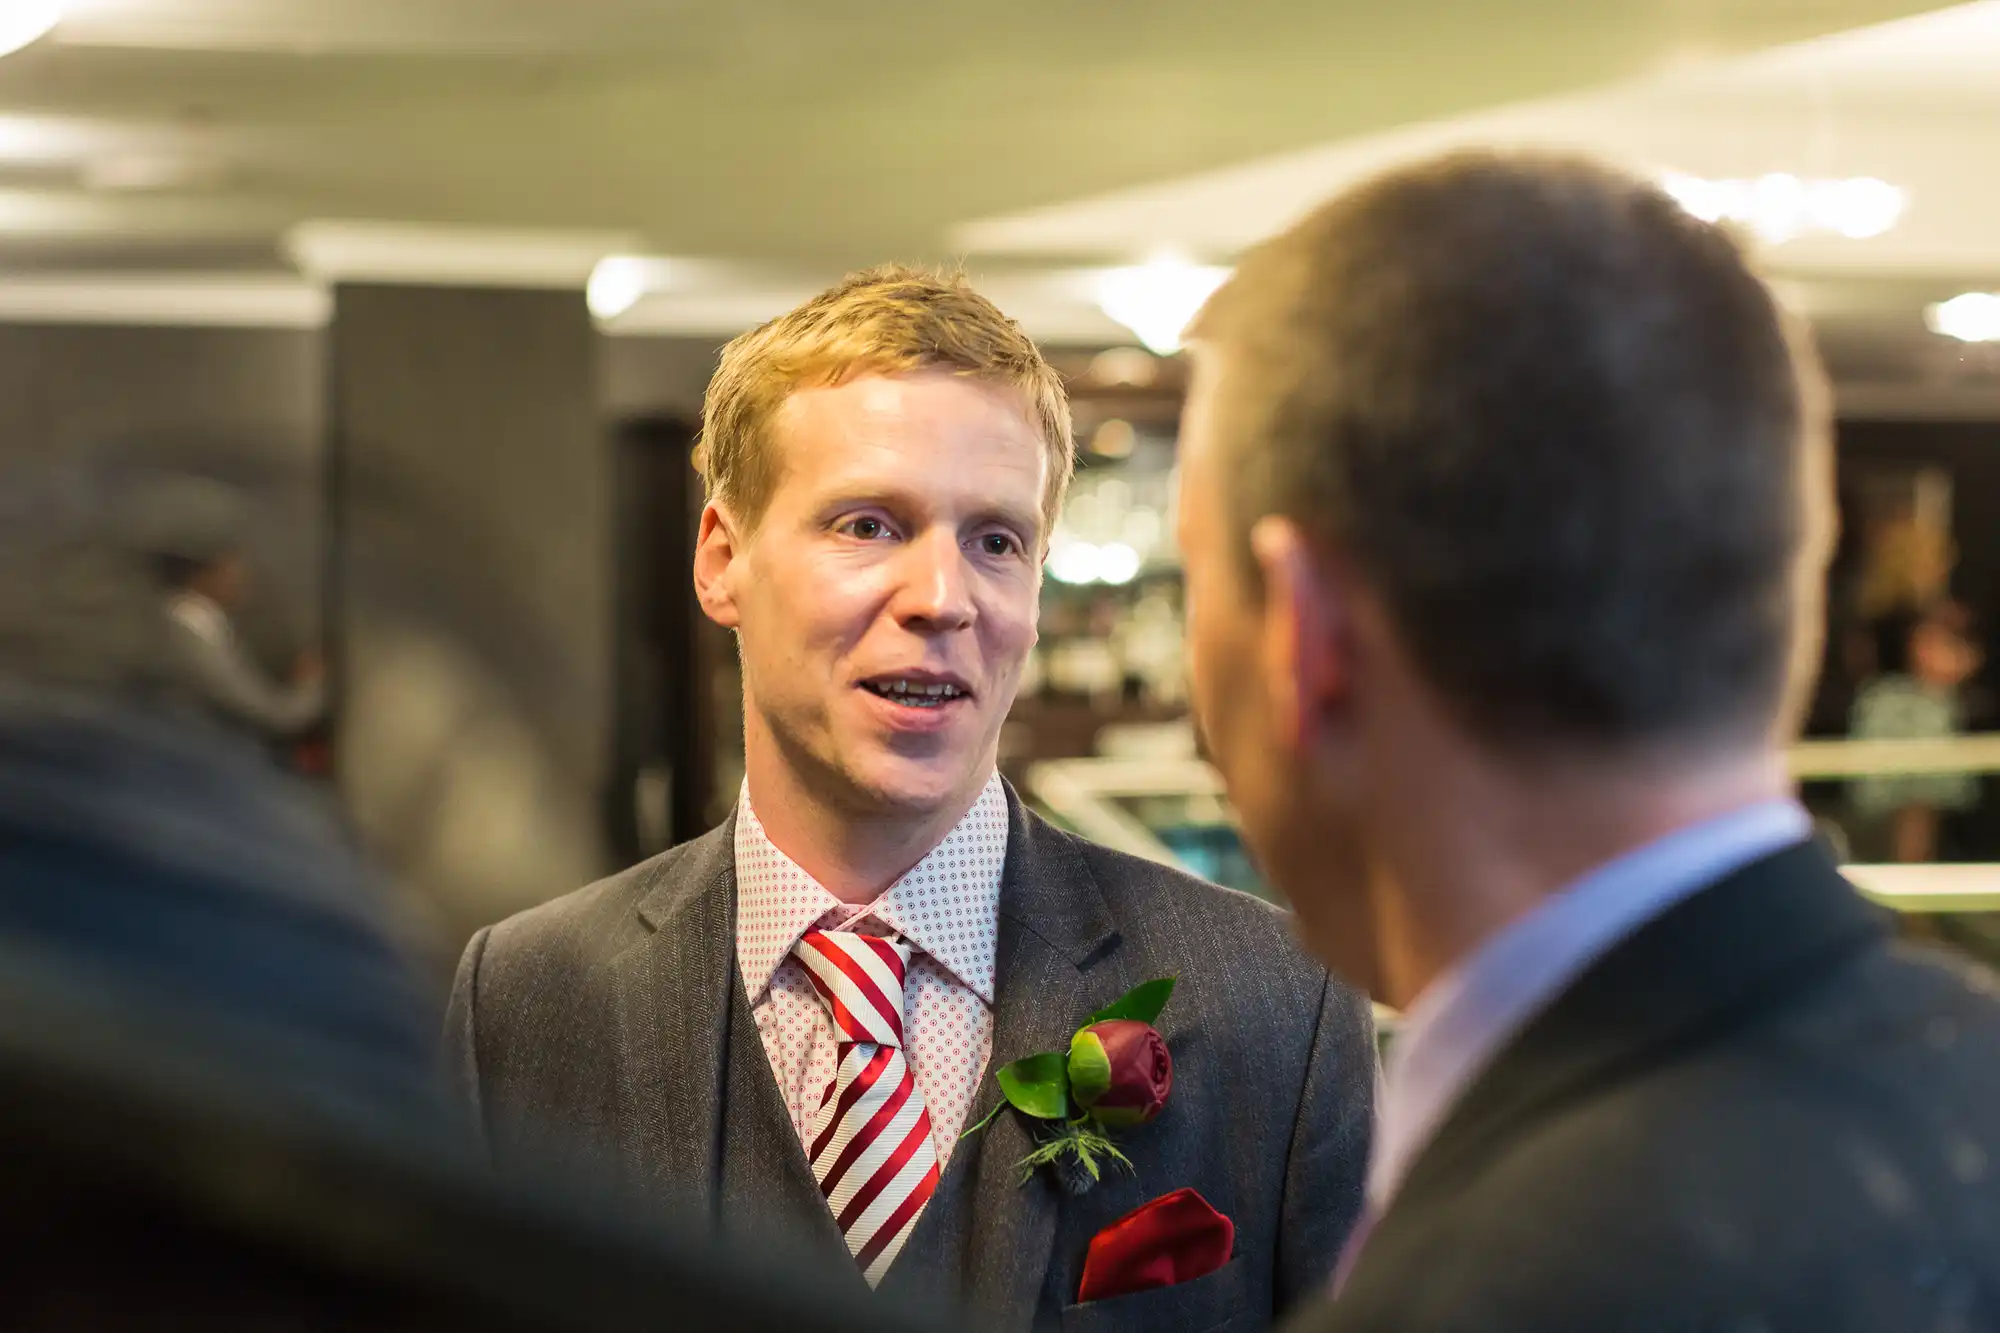 A man in a suit with a striped tie and red boutonniere engaged in conversation at a social event, facing another man whose back is to the camera.